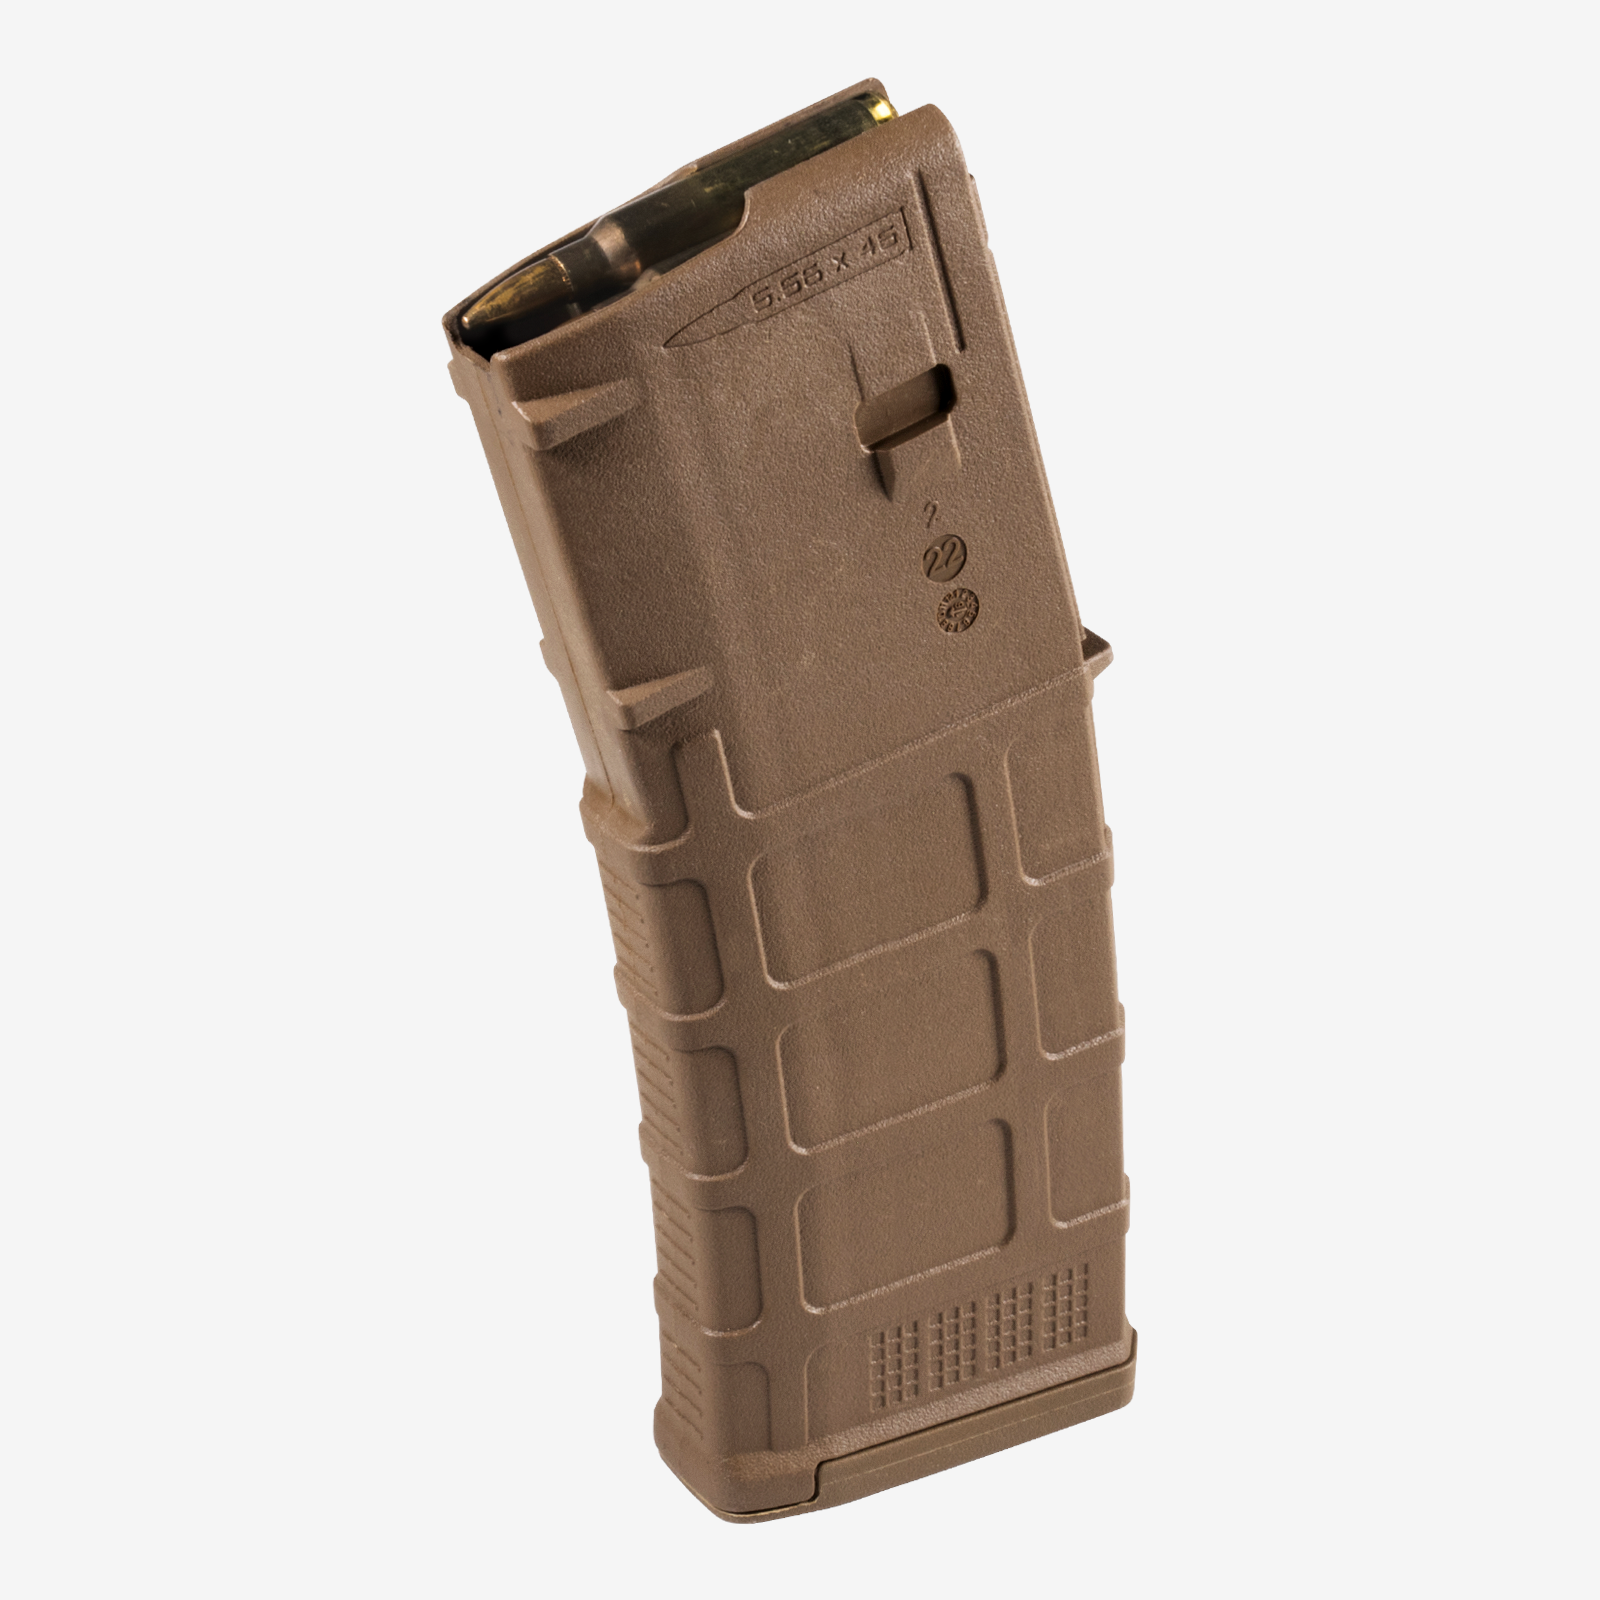 The Magpul 30RD AR15 Tan GEN3 PMAG rifle magazine holds 30 5.56x45mm NATO or .223 Remington cartridges for use with AR-15 and M4 rifles.